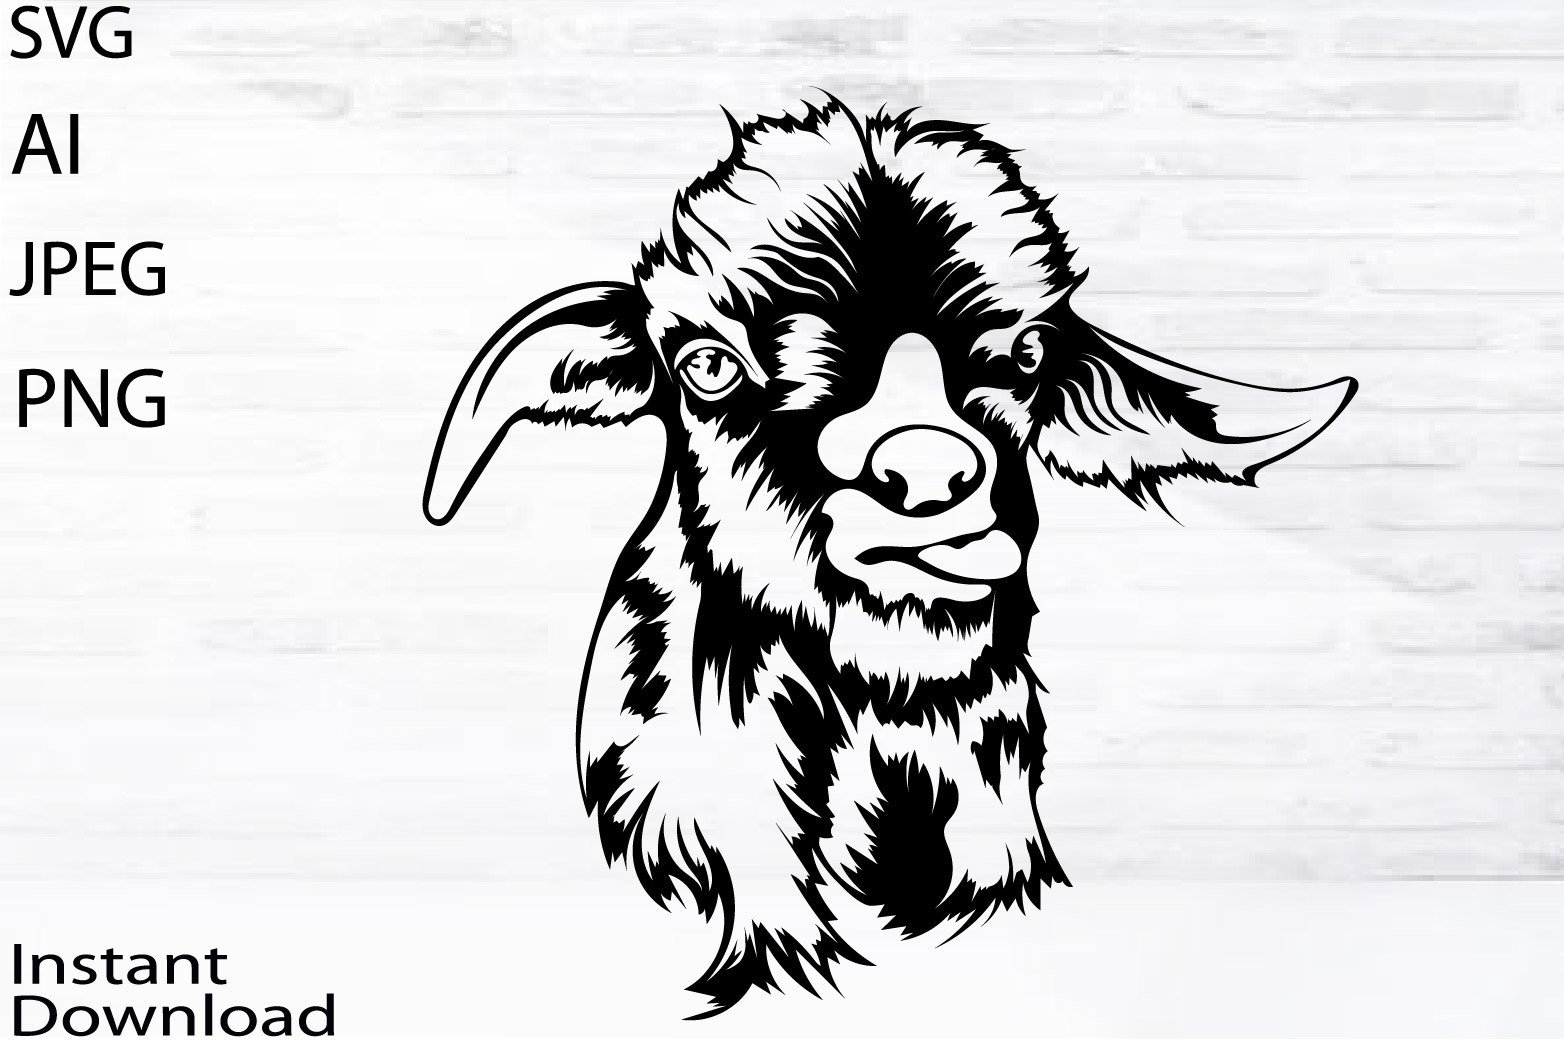 Little Lamb SVG/Png/Jpg/Ai/Vector Sheep Graphic by nazarovatetyana21 ...